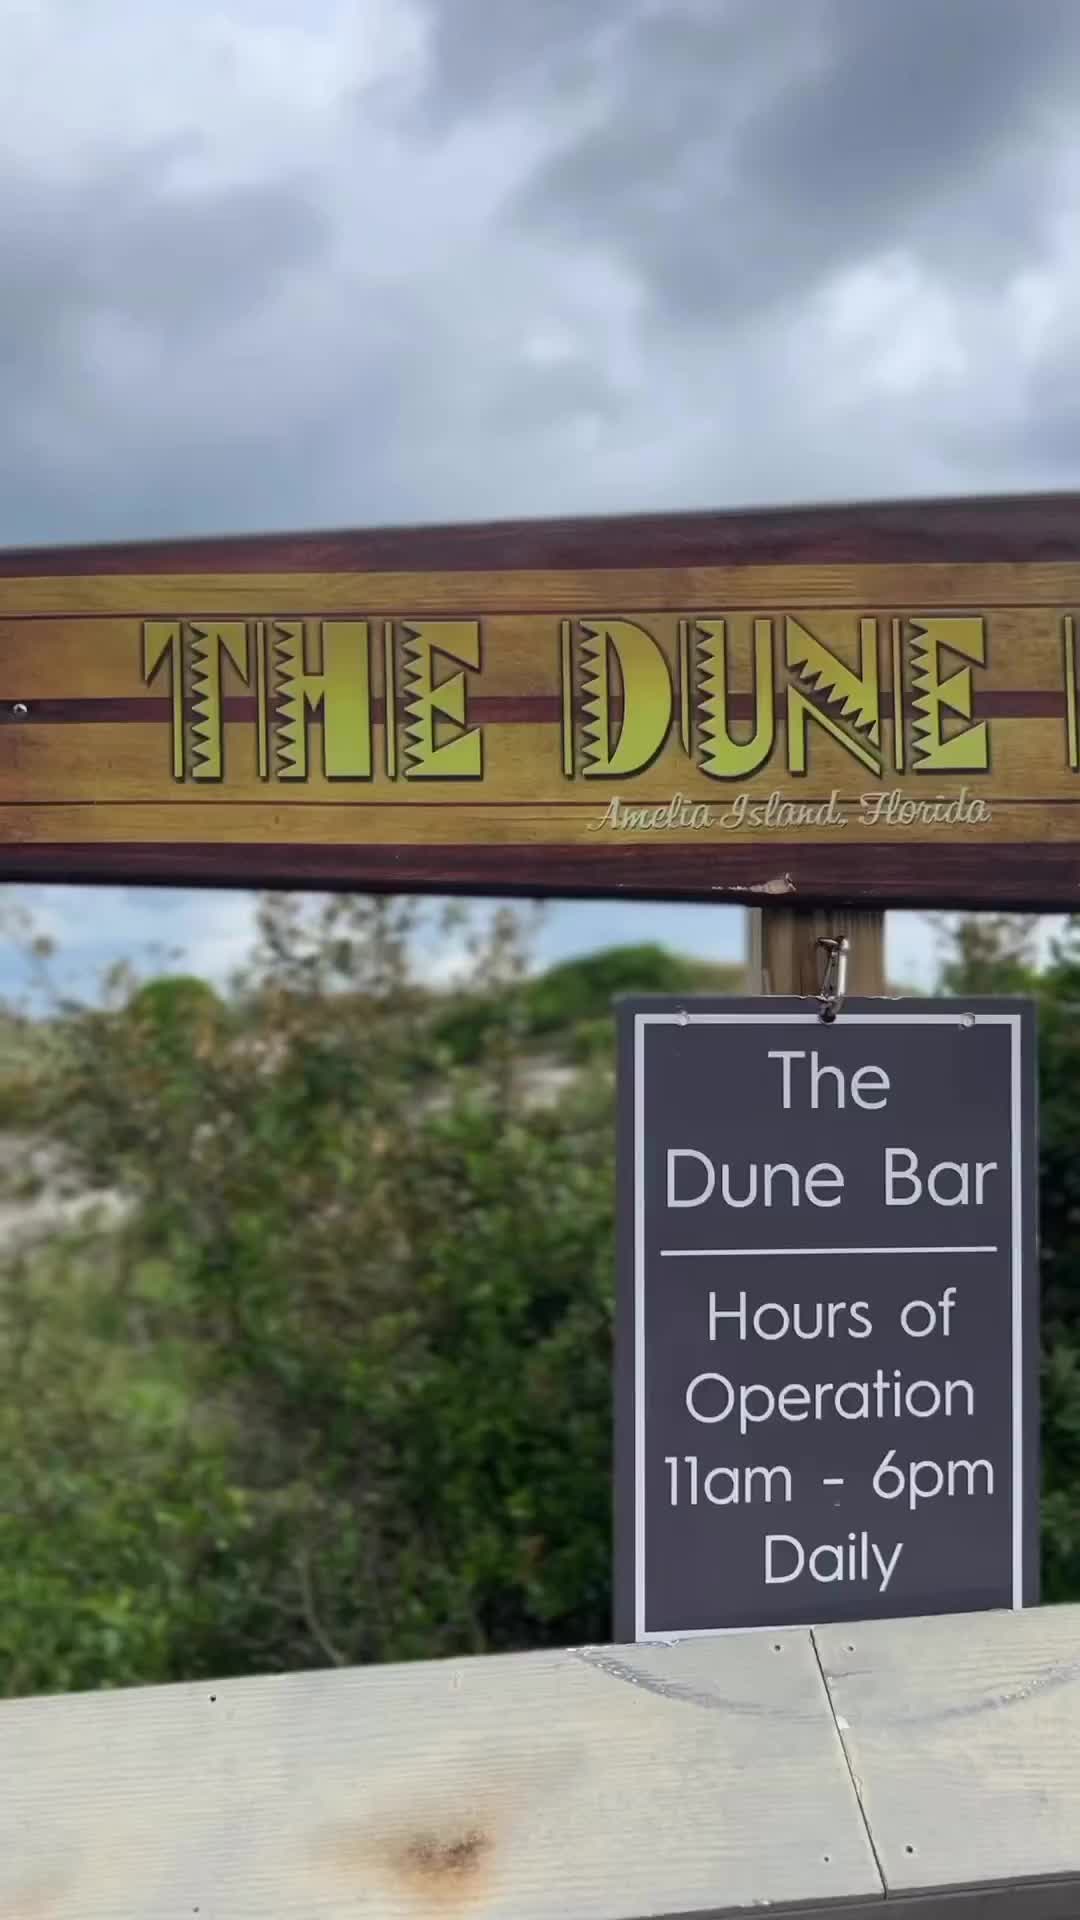 Quick Lunch at The Dune Bar Before the Storm